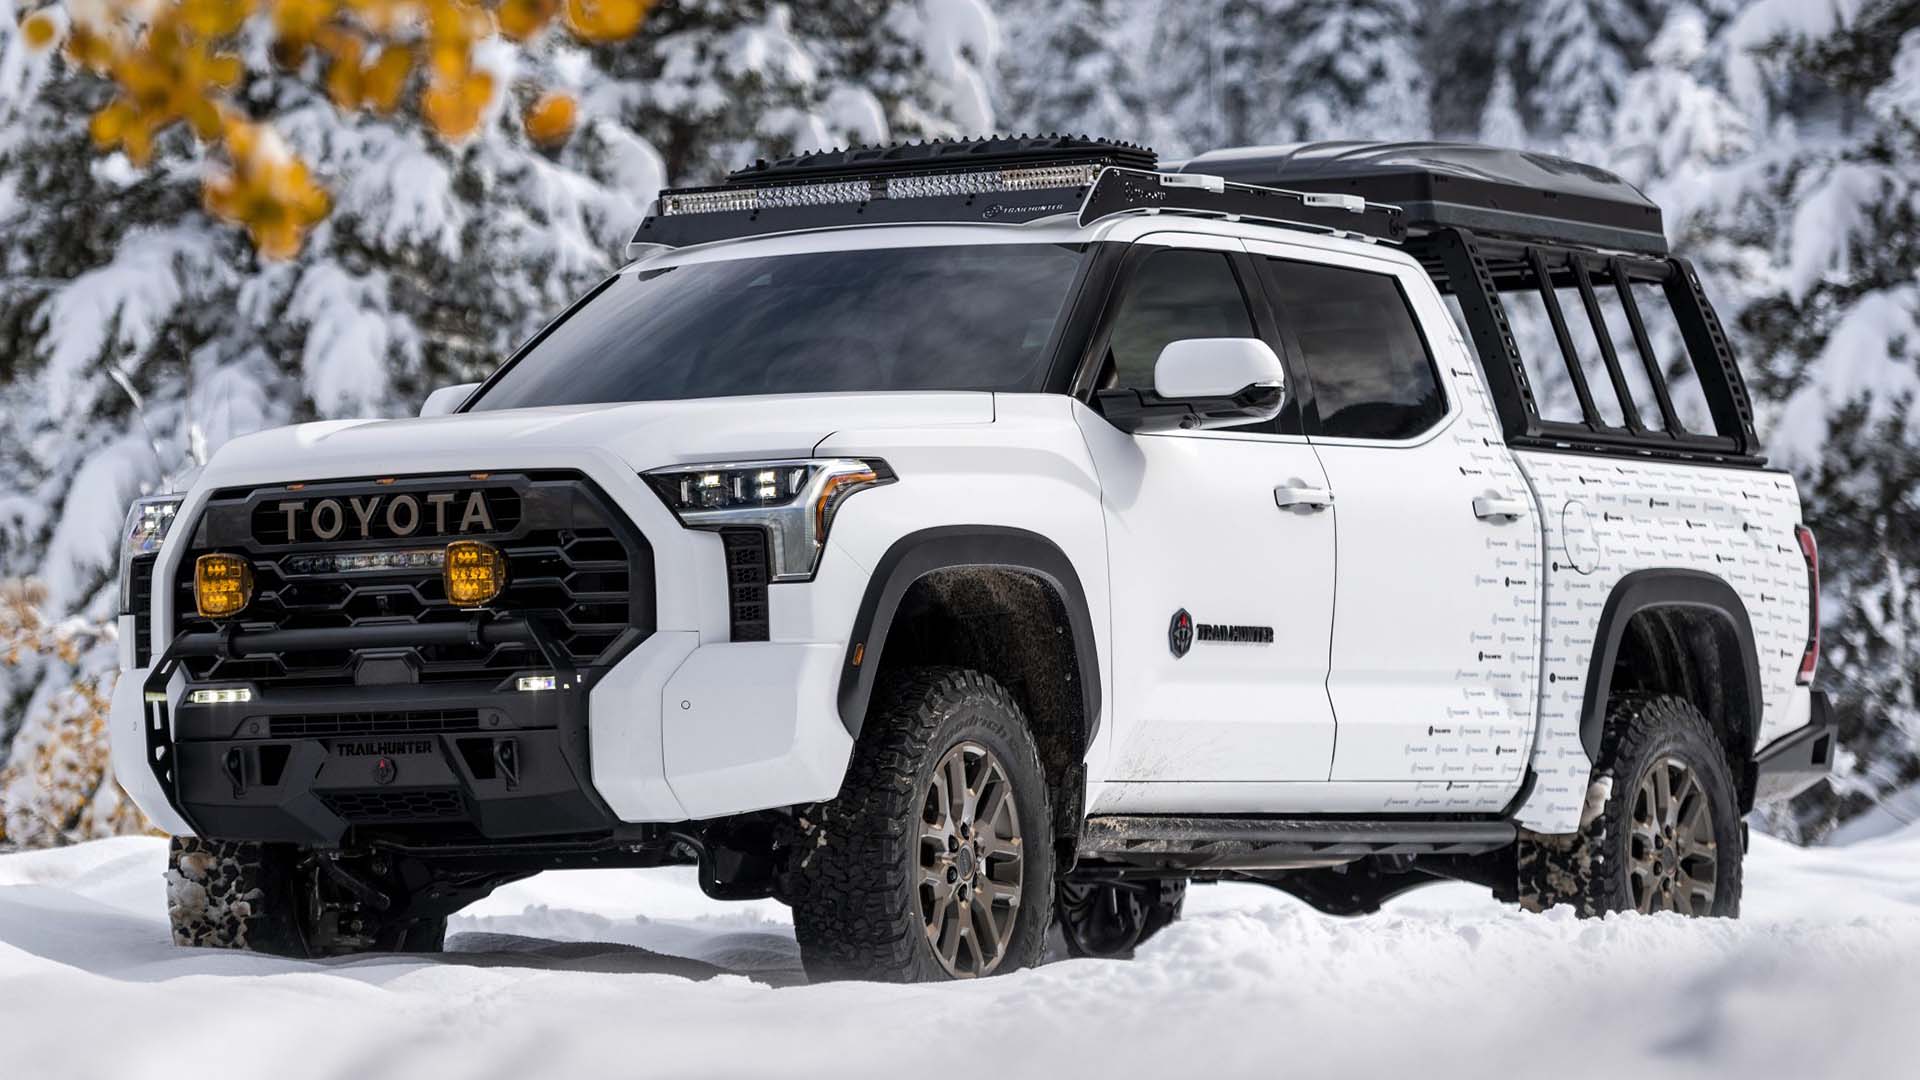 Toyota Trucks and SUVs Are Getting a Factory-Built Overlanding Trim